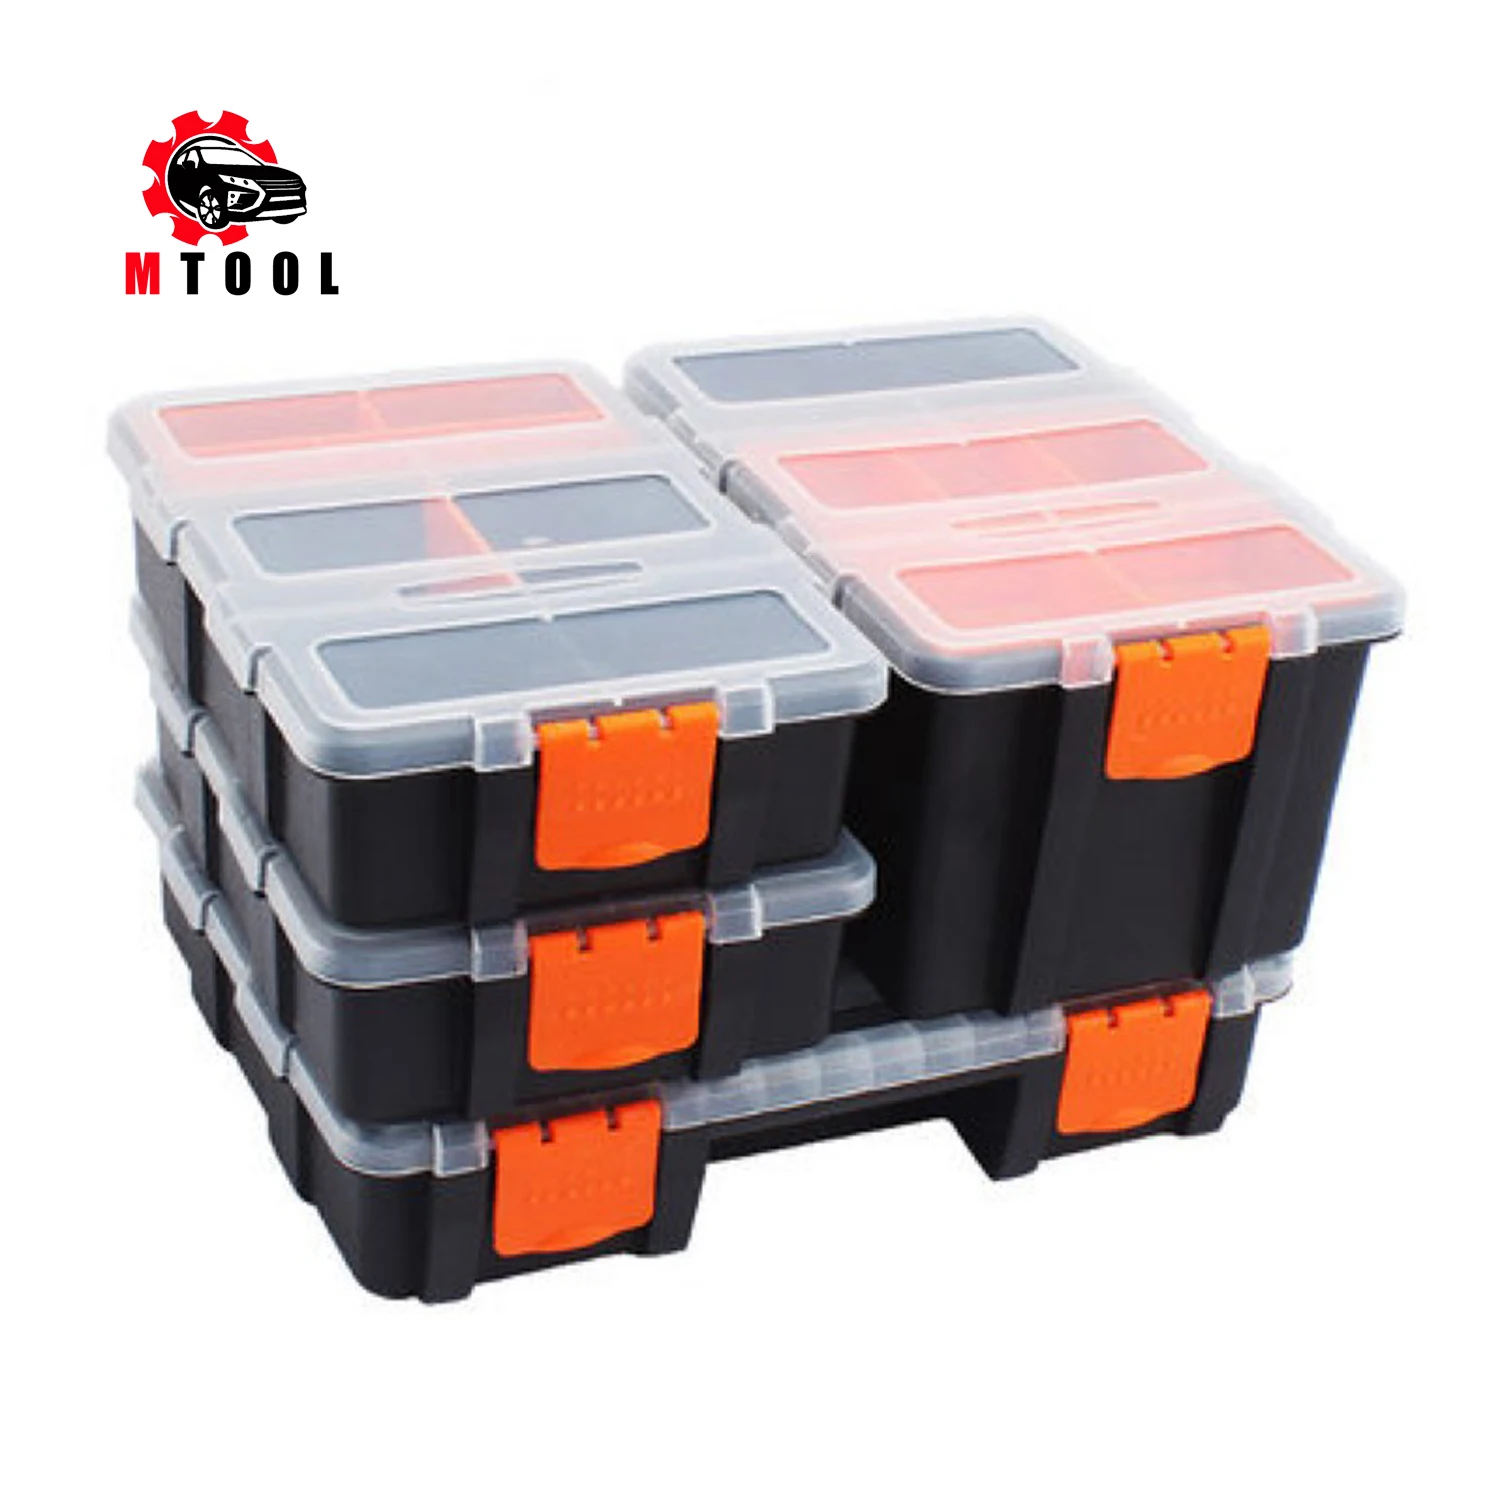 

4Pc/set Tool Case Components box Plastic Parts Combined Transparent Screw Containers Storage Case Hardware accessories tool box